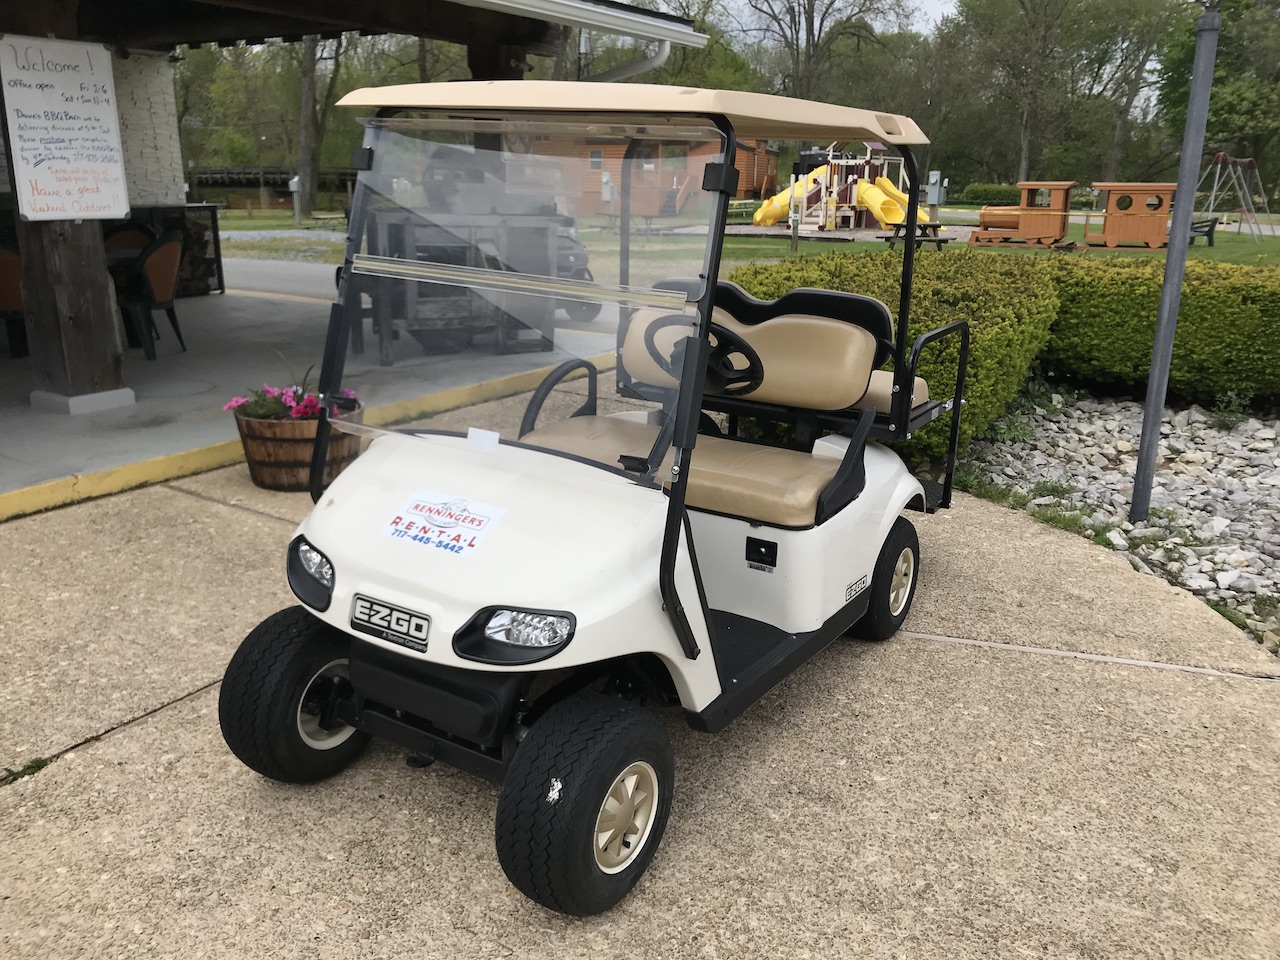 lancaster campground with golf cart rentals